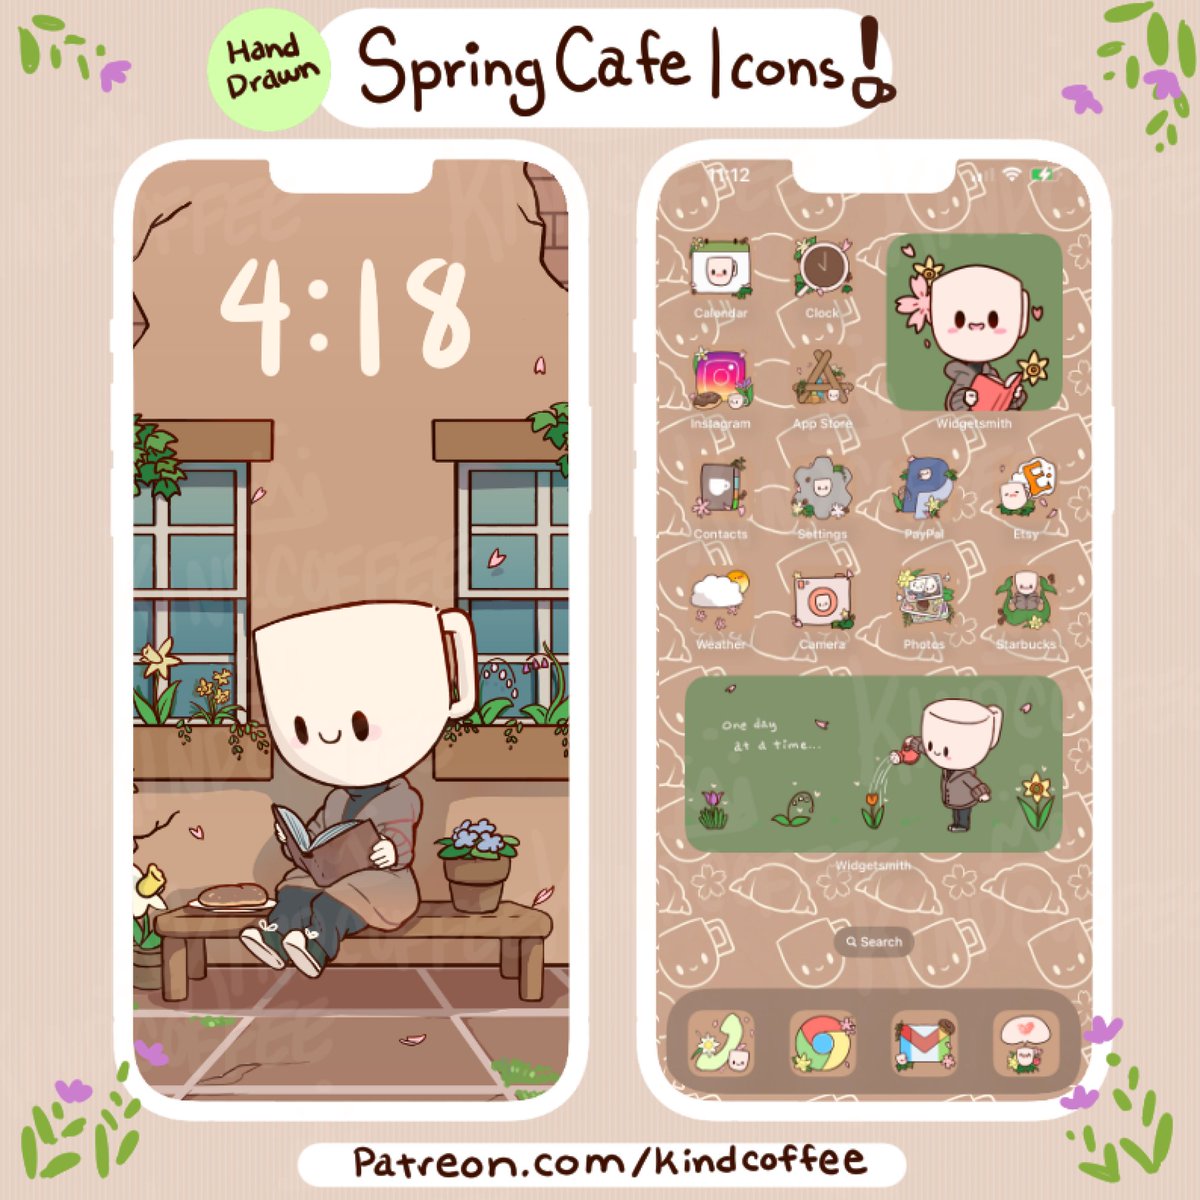 My Spring Cafe Icon pack is now up for sale! Please take a look if you can! Thank you! etsy.com/listing/145226…